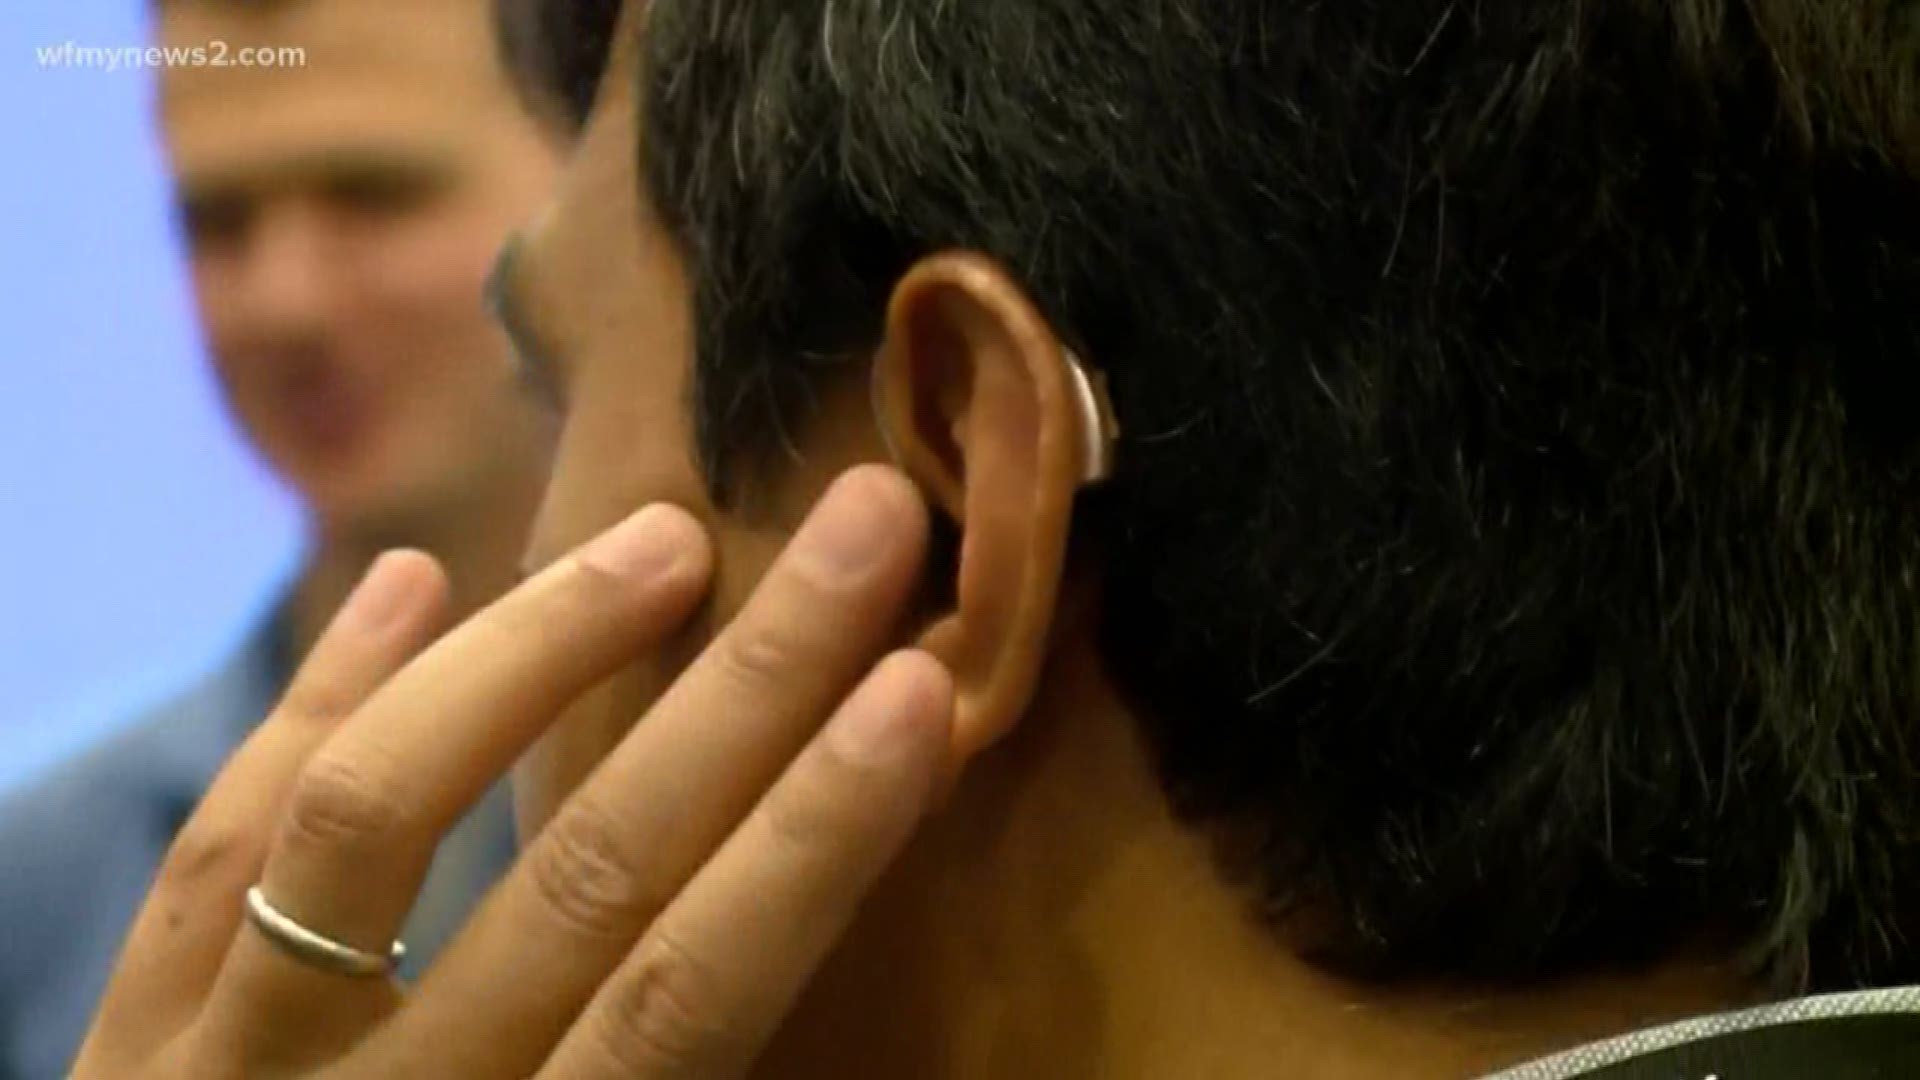 High-Tech Hearing Aid Could Change People's Lives